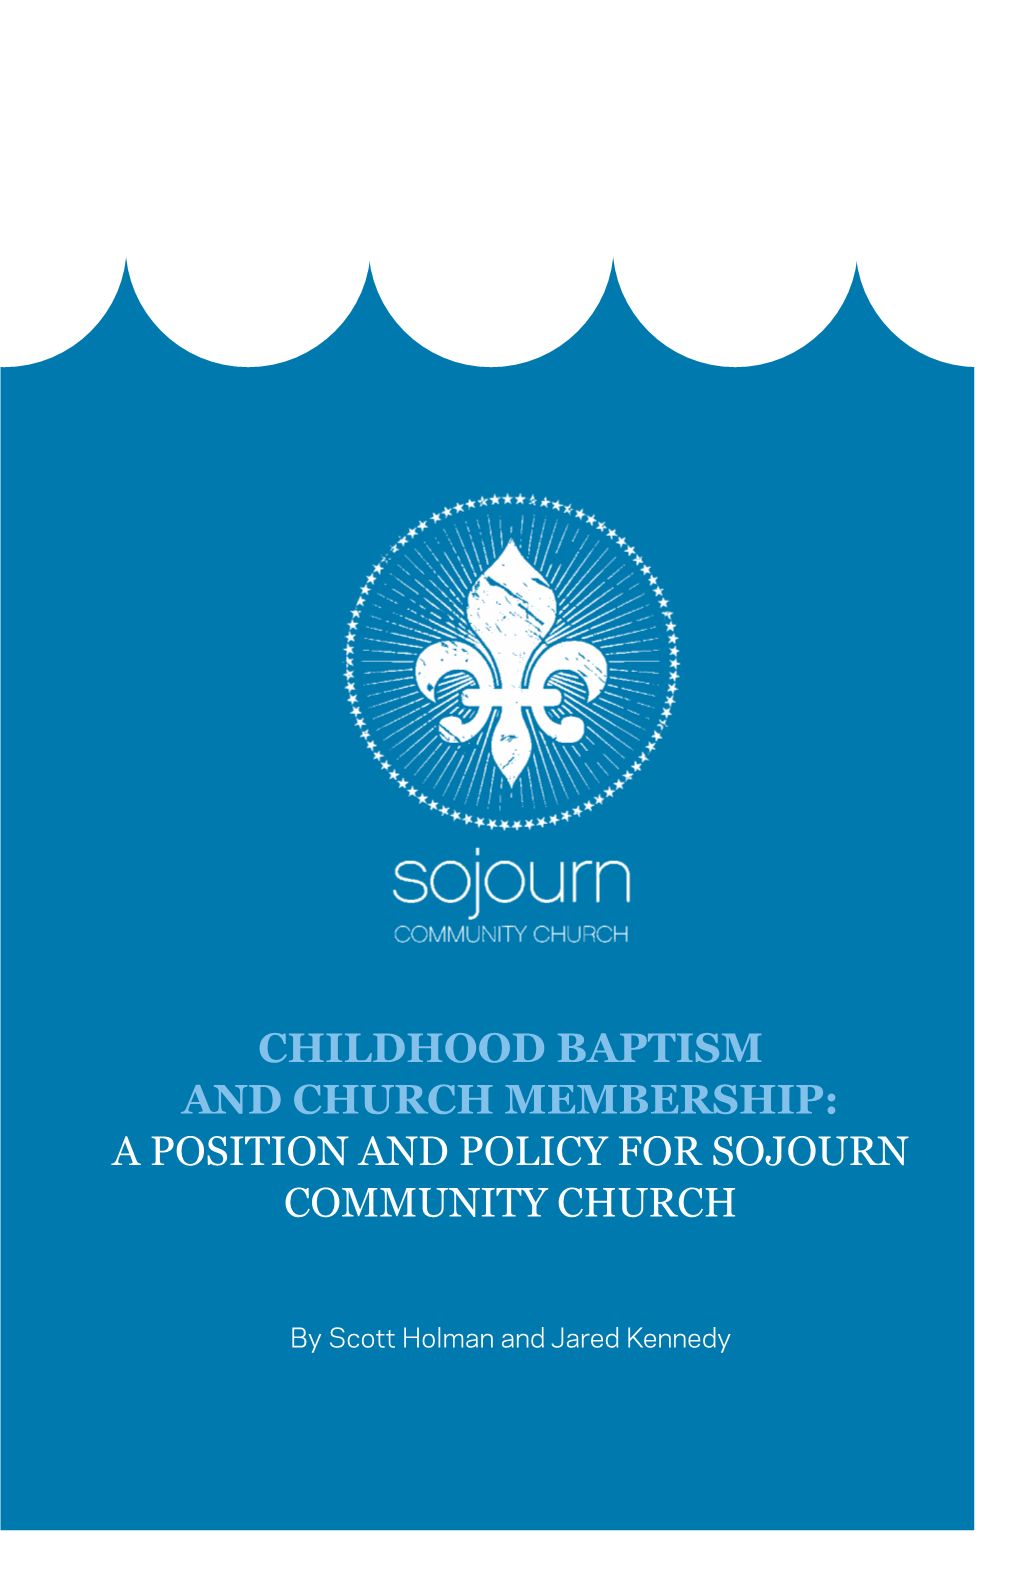 Childhood Baptism and Church Membership: a Position and Policy for Sojourn Community Church